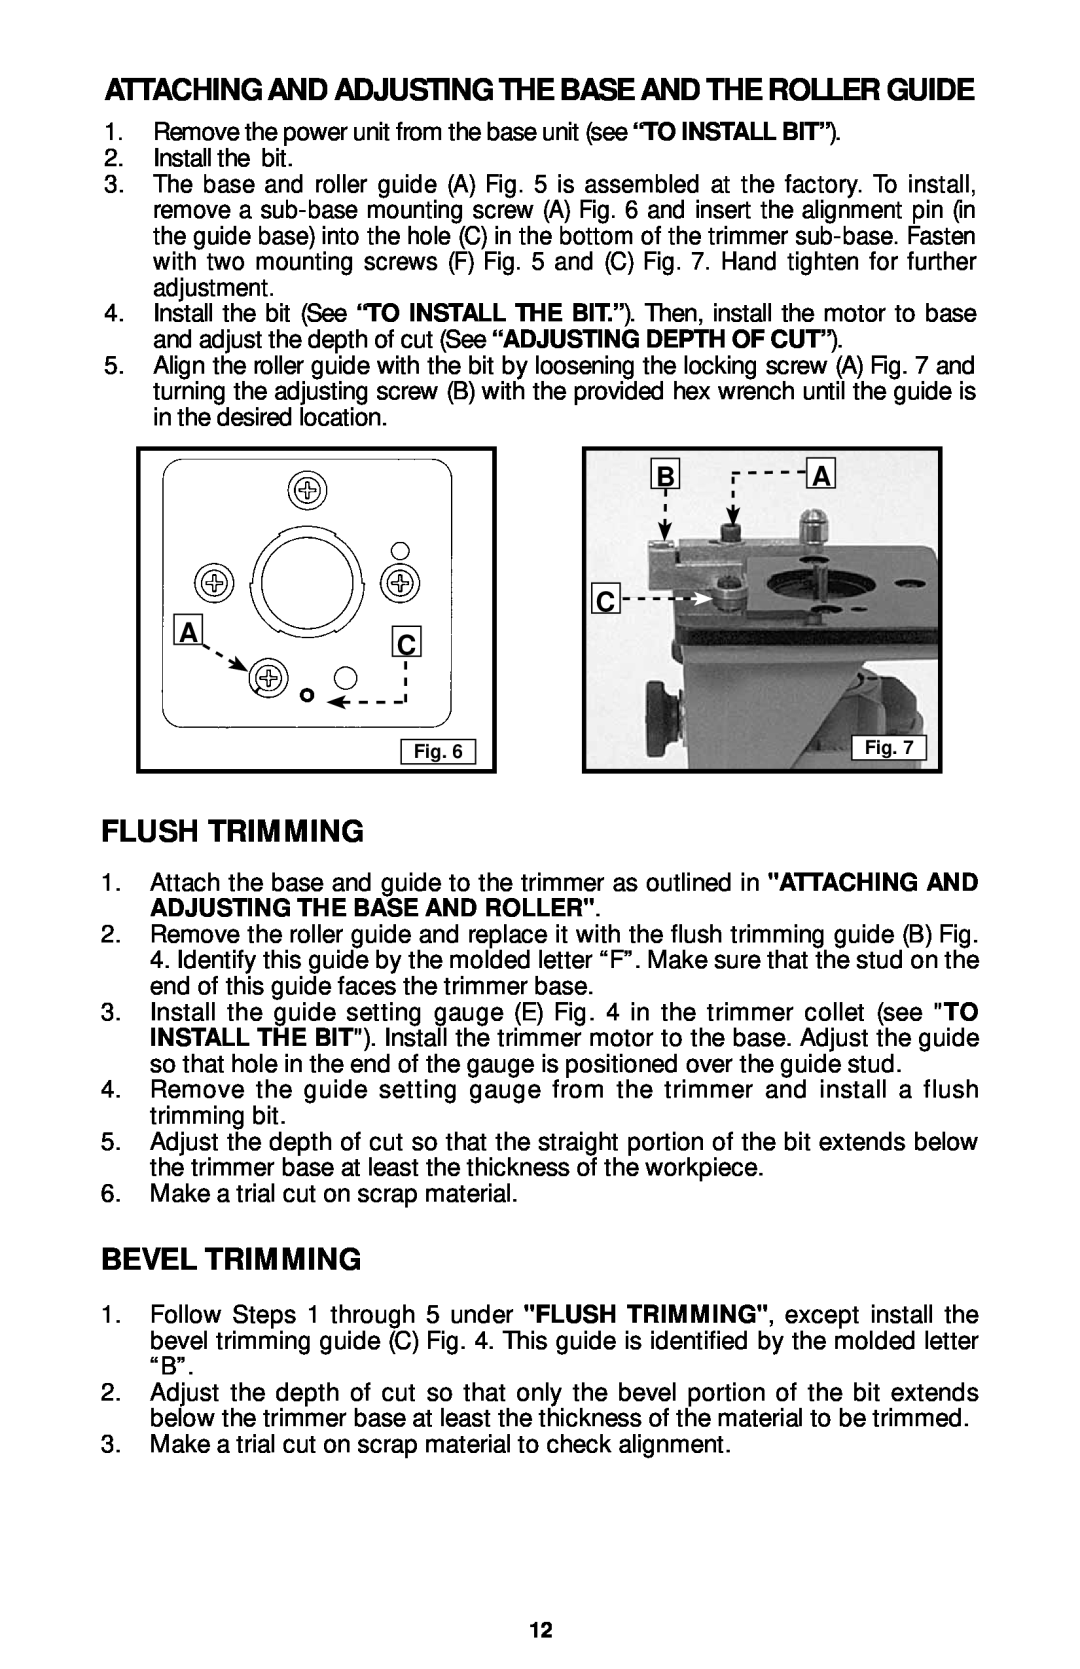 Porter-Cable 7310, 7320, 7319, 7312 instruction manual Flush Trimming, Bevel Trimming, B A C 